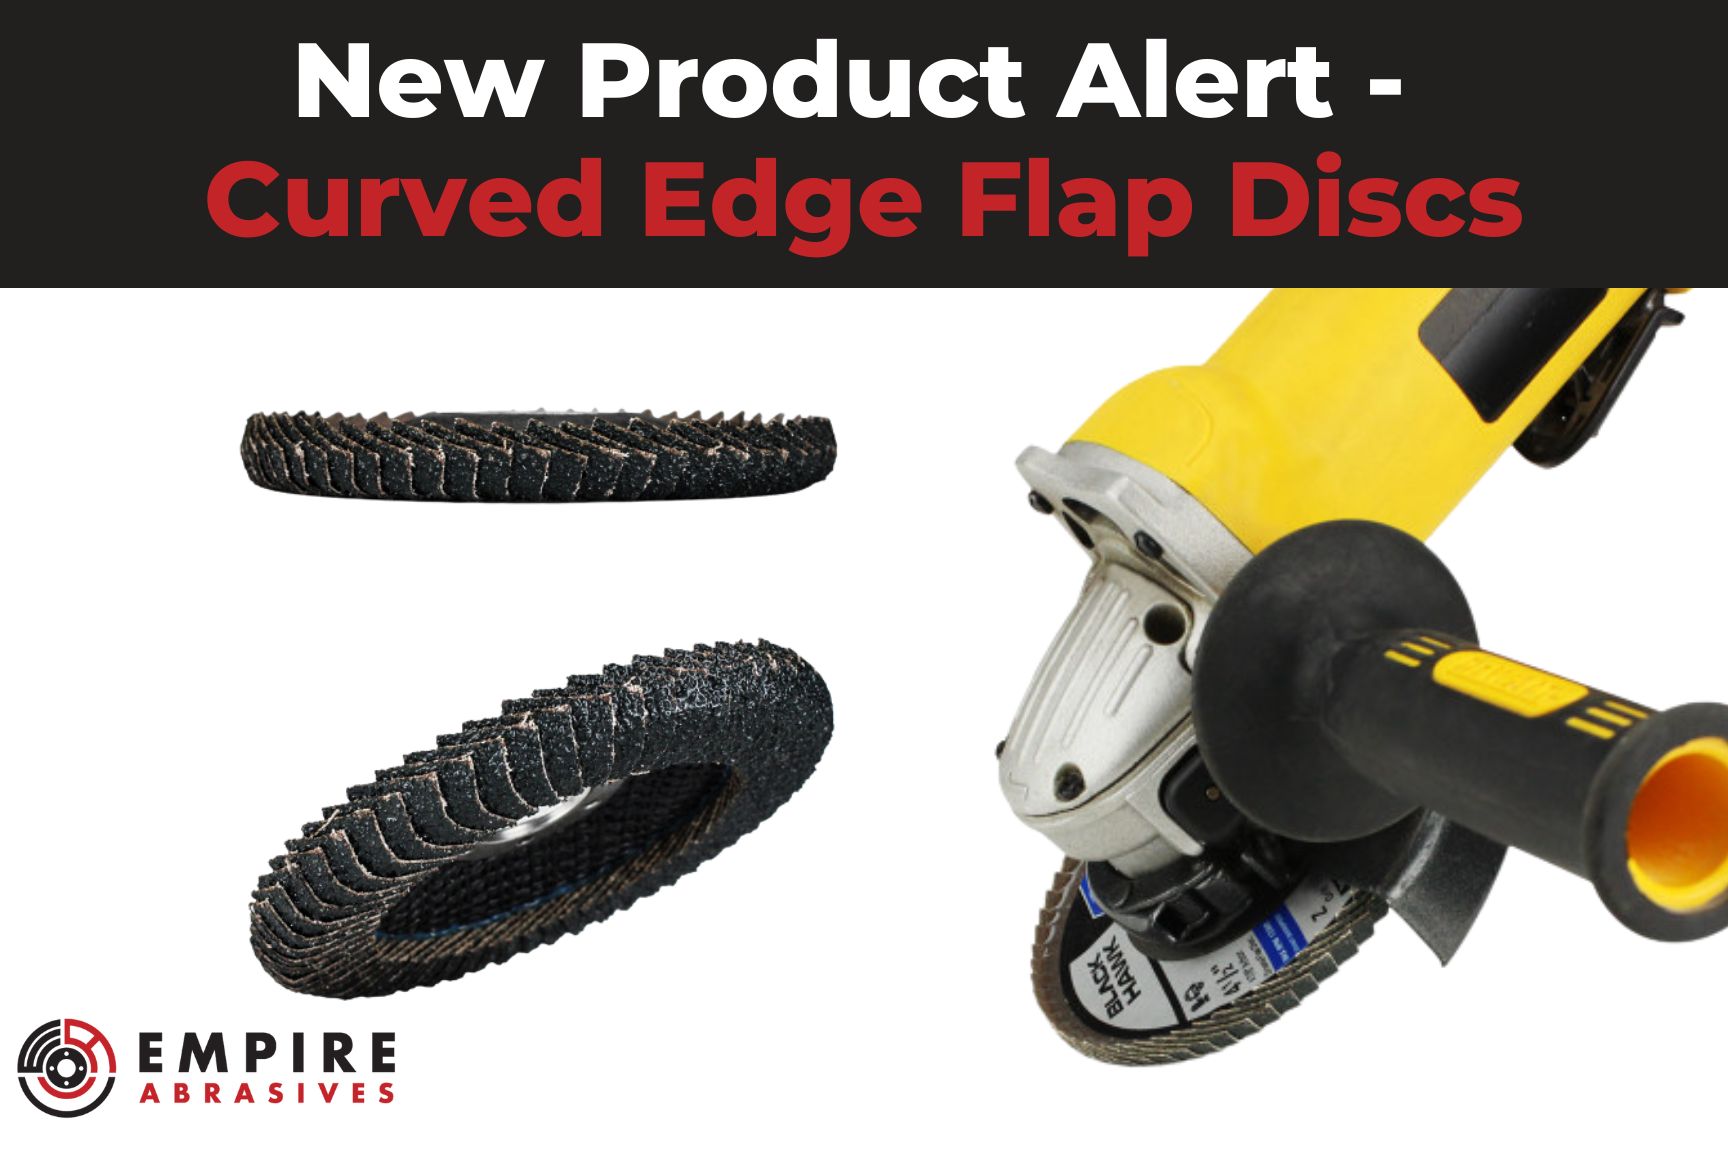 New product announcement - Curved/rounded edge flap discs for fillet weld grinding